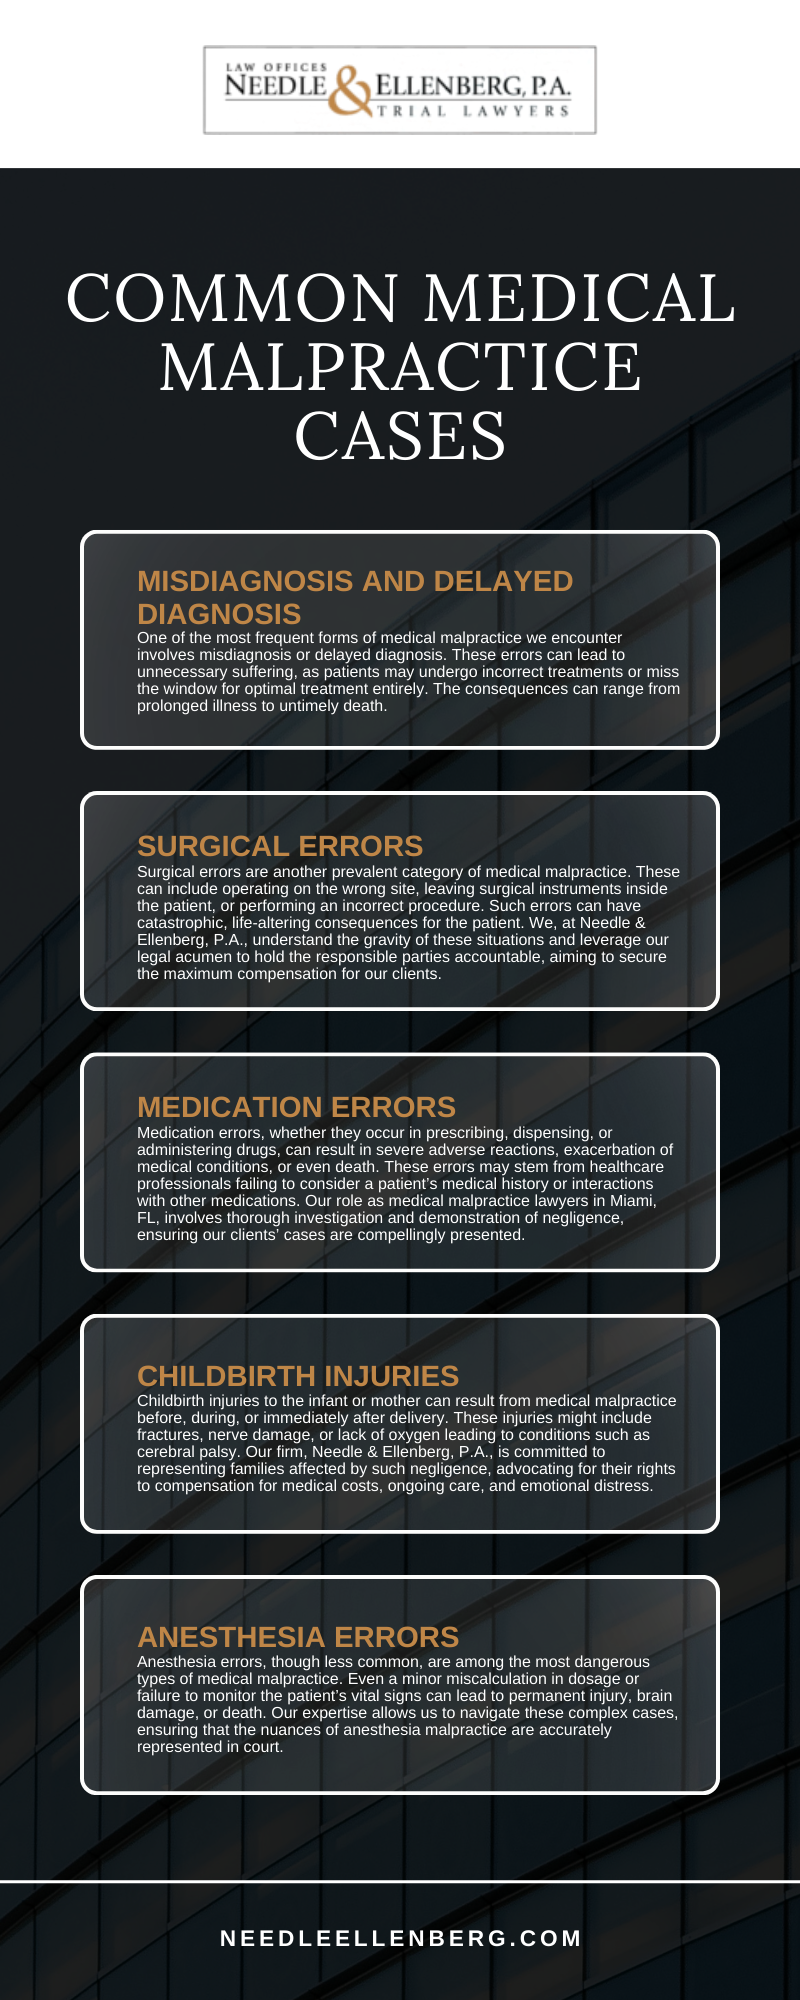 Common Medical Malpractice Cases Infographic